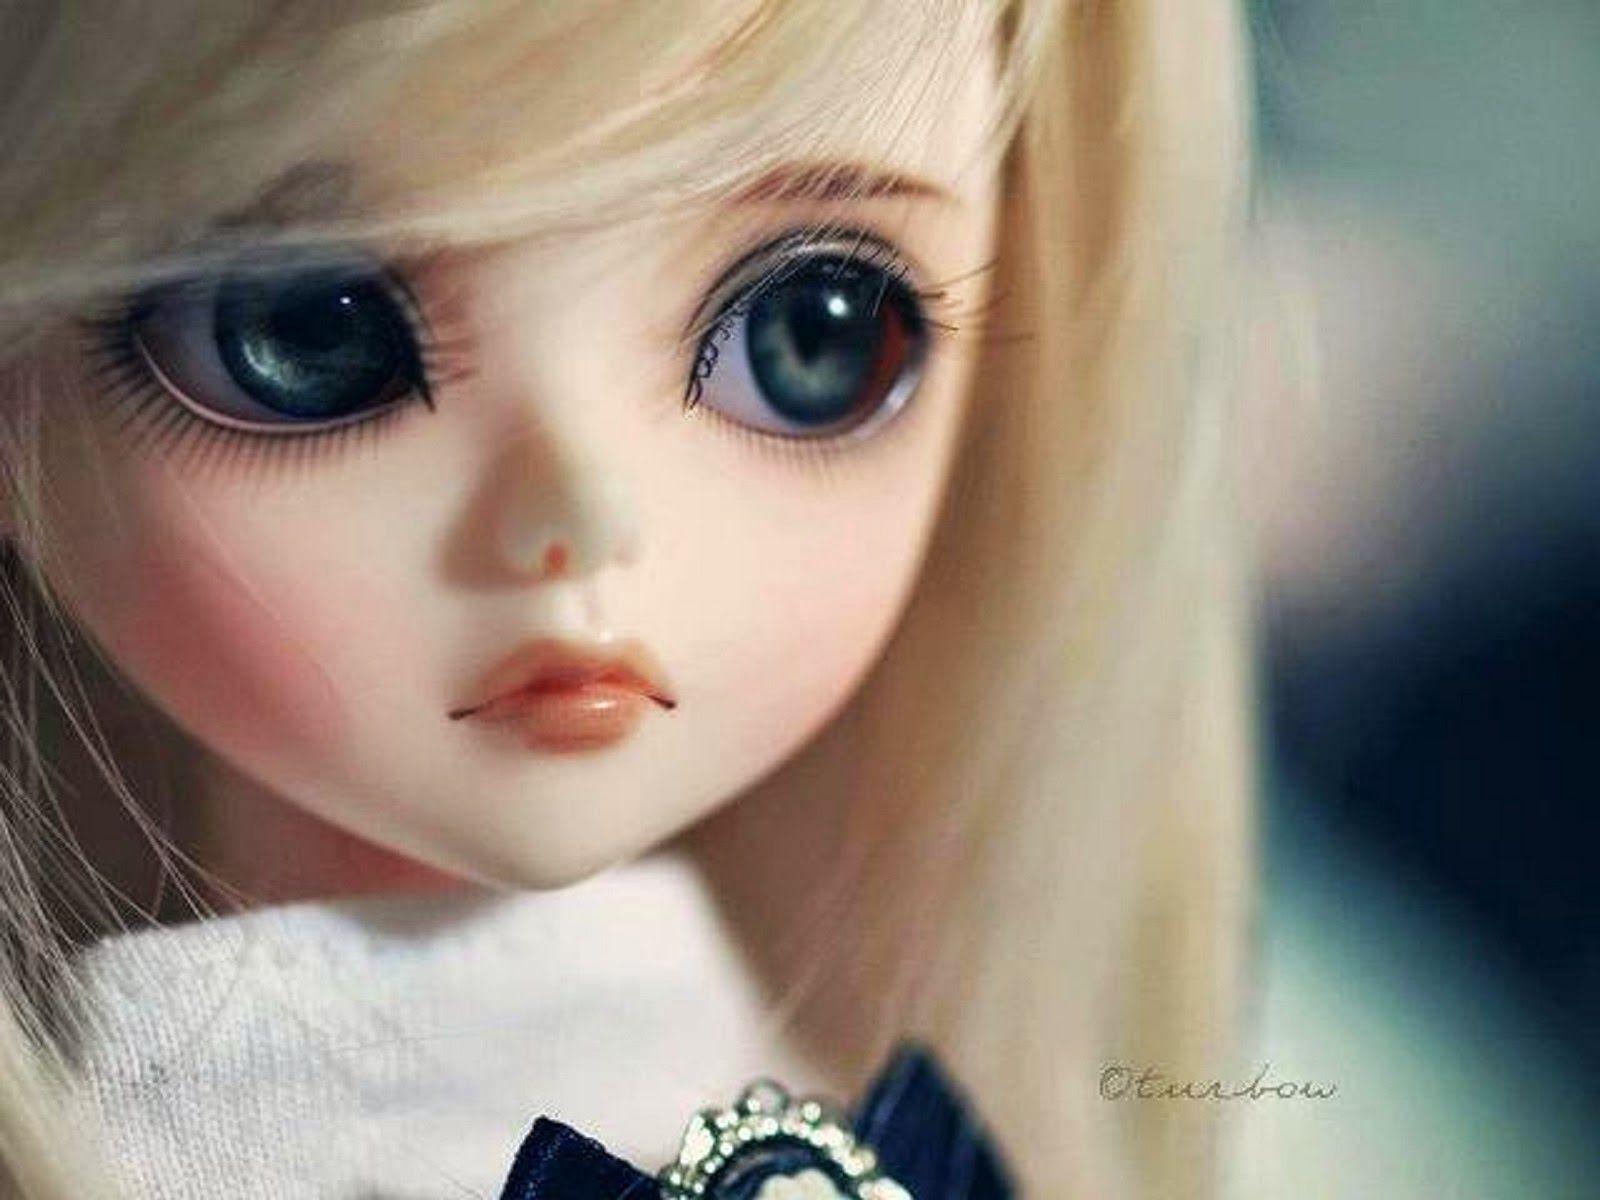 Doll Wallpaper Free Doll Background